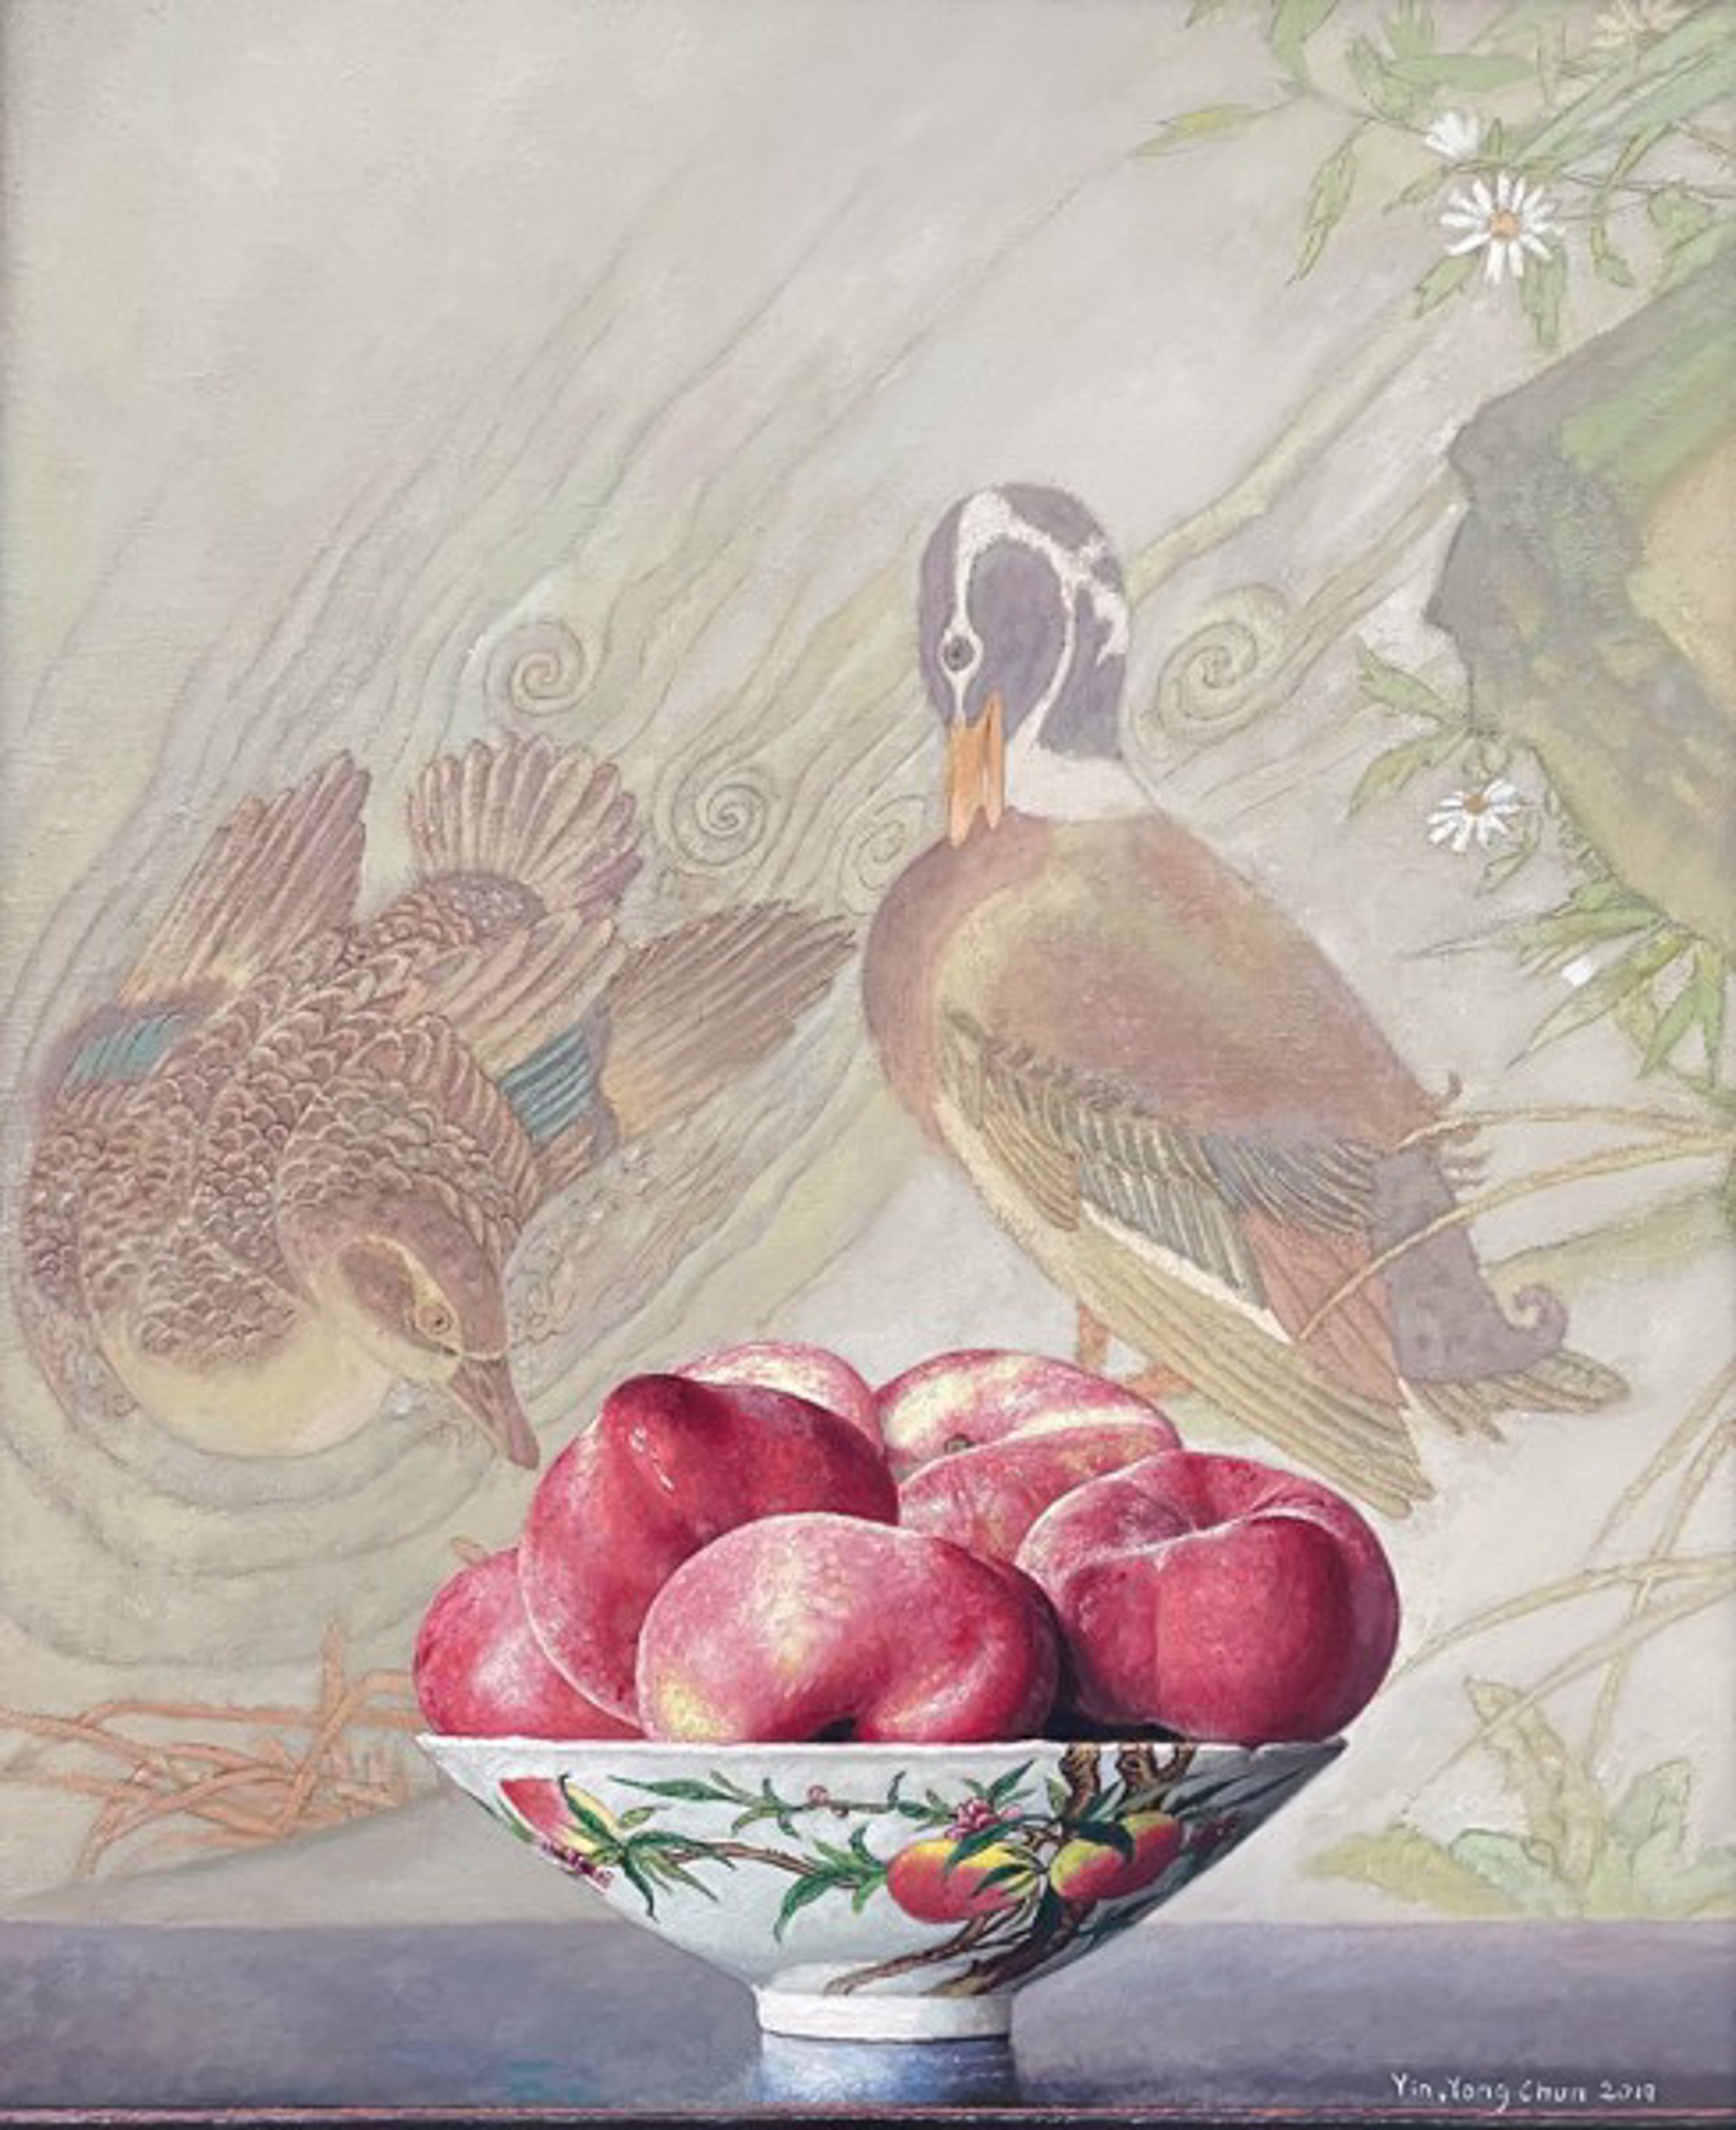 A Pair of Ducks with Sweet Peaches by Yin Yong Chun